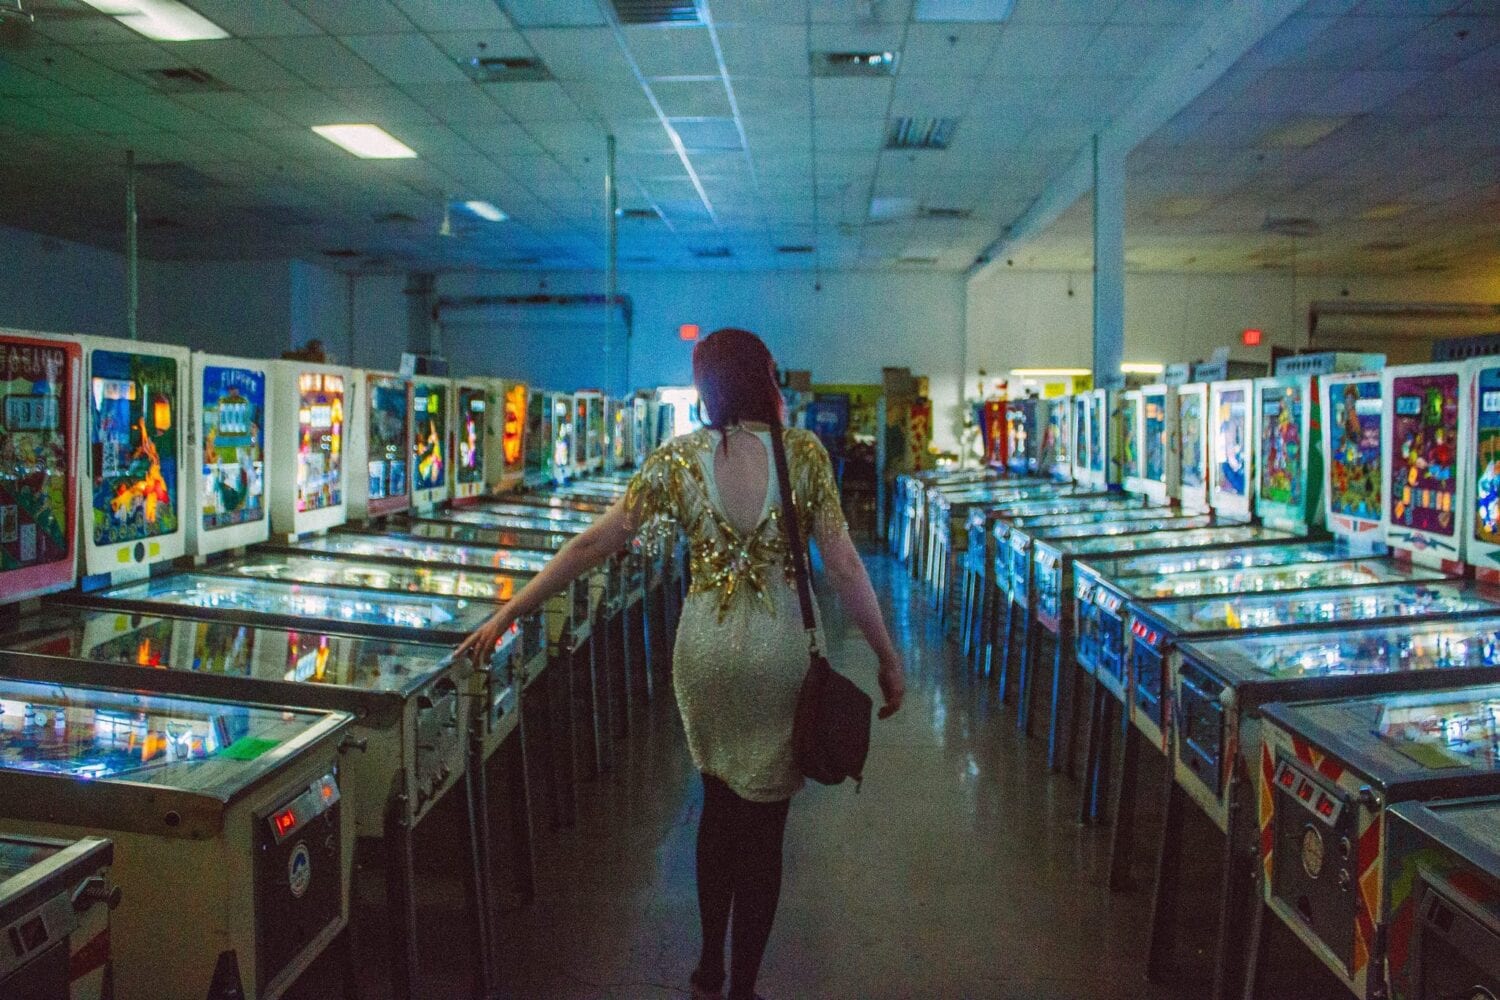 The Pinball Hall of Fame, One of the Best Alternative Things to do in Las  Vegas - The Creative Adventurer